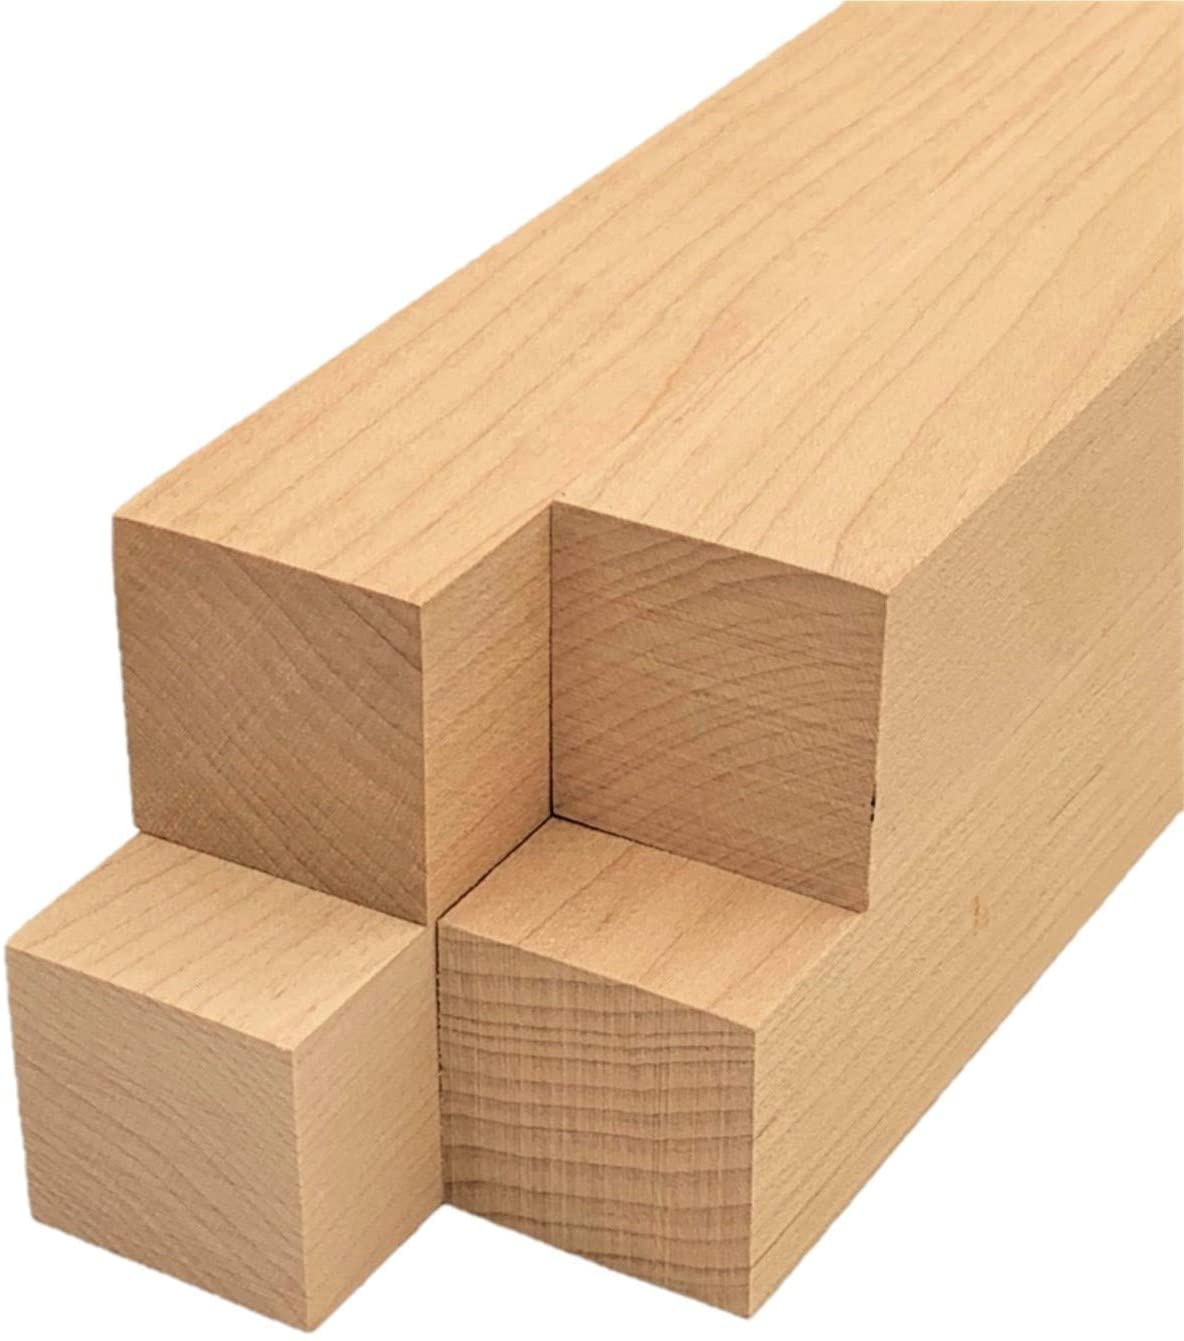 Woodturning Maple wood blank 1 3/16x1 3/16x19 11/16in Craft wood blanks  100124